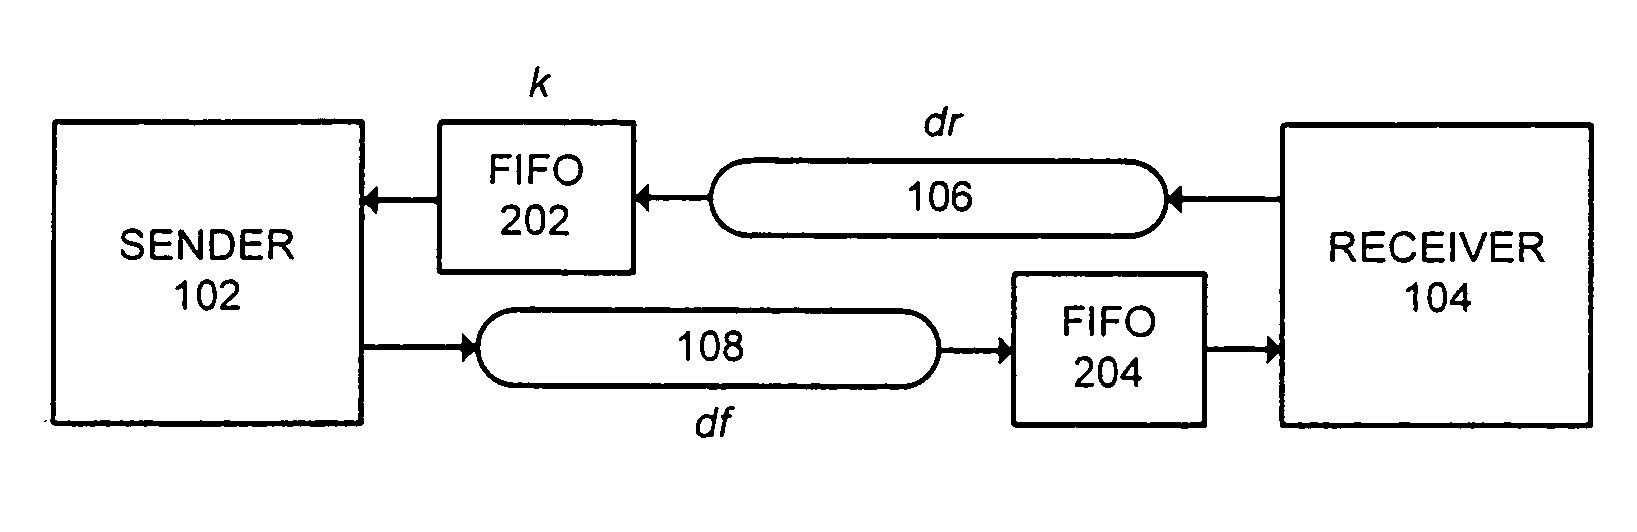 Apparatus and method for high-throughput asynchronous communication